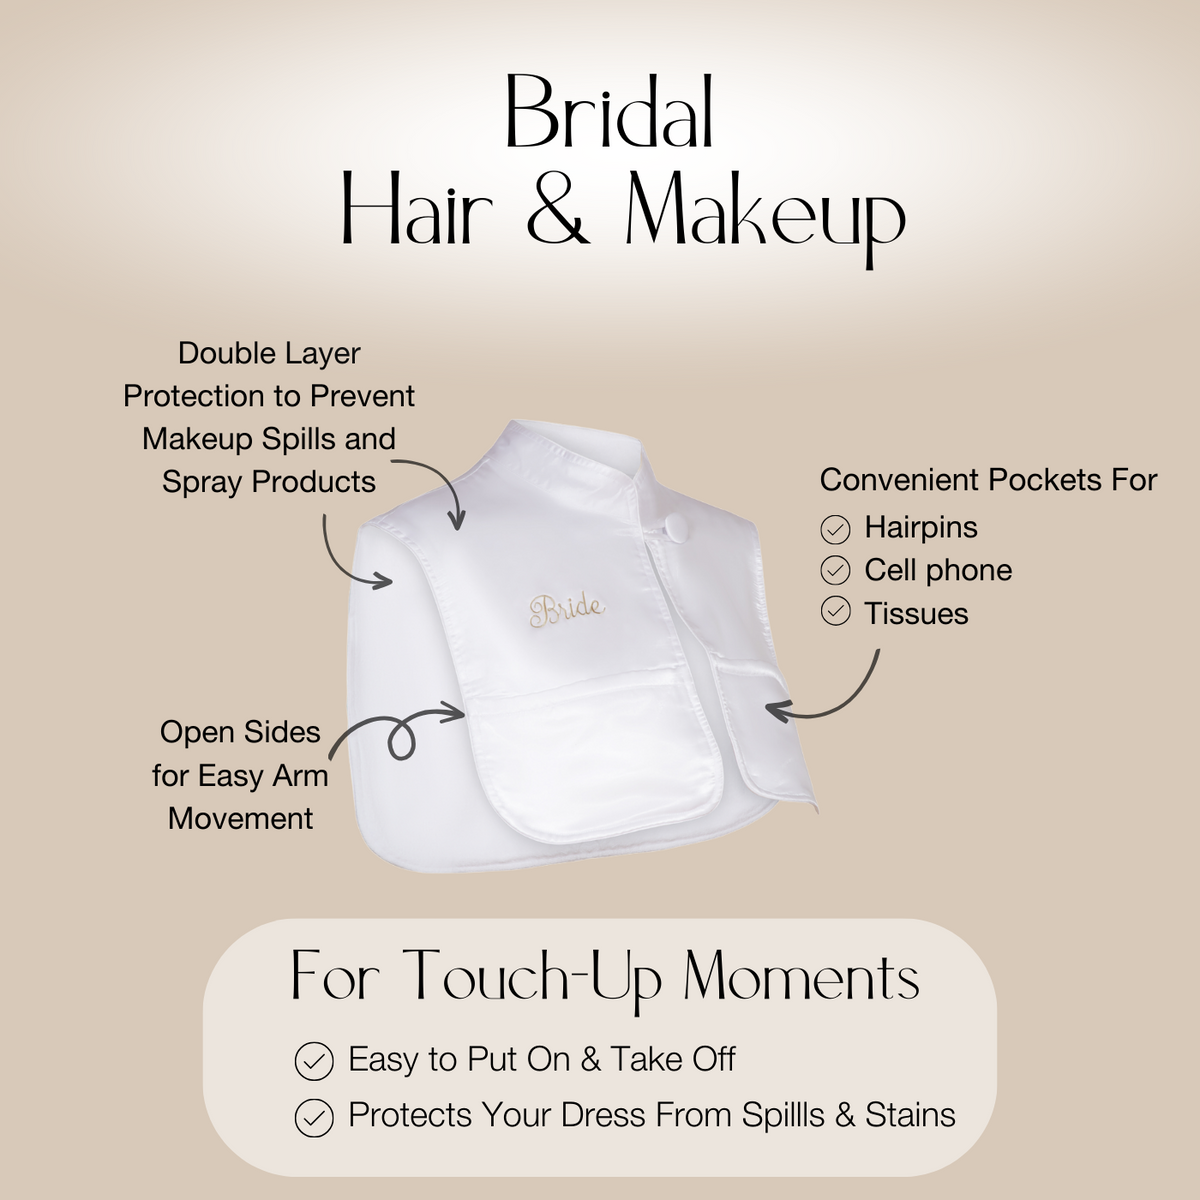 Bridal Hair and Makeup Monii Features